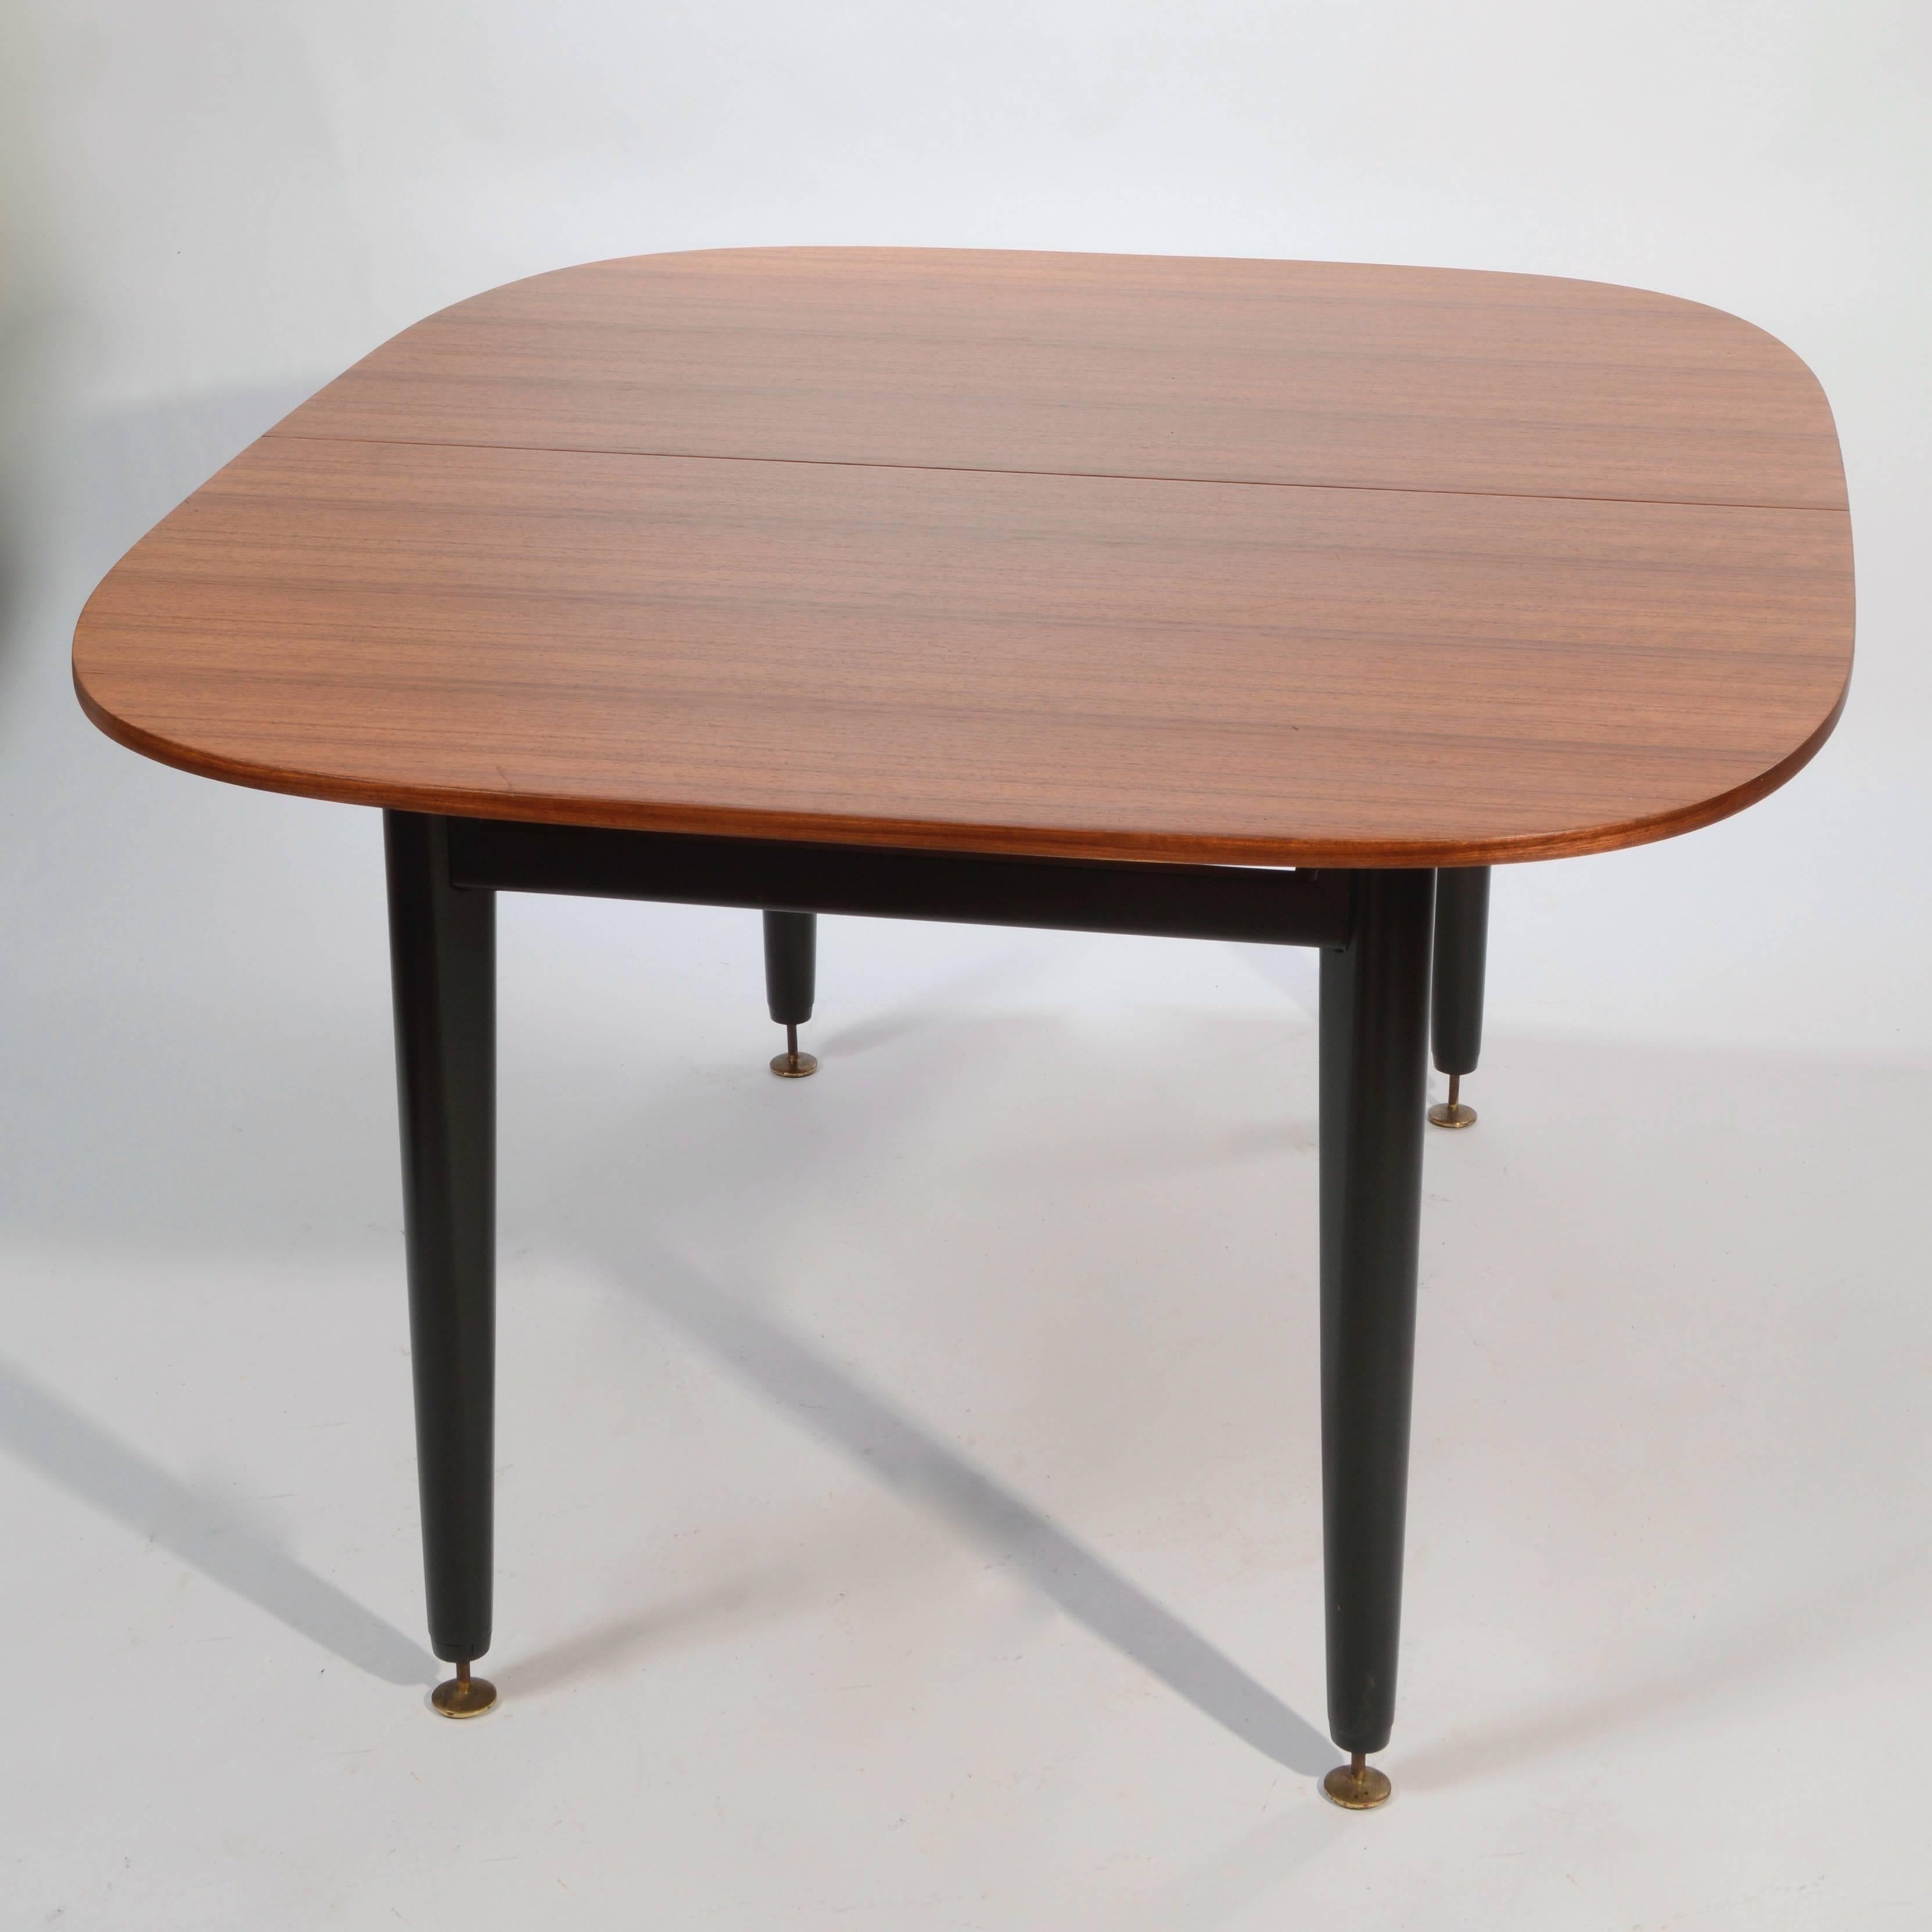 This is a fully restored early dining table by E Gomme, G-Plan for the librenza range in mahogany and black. The 20